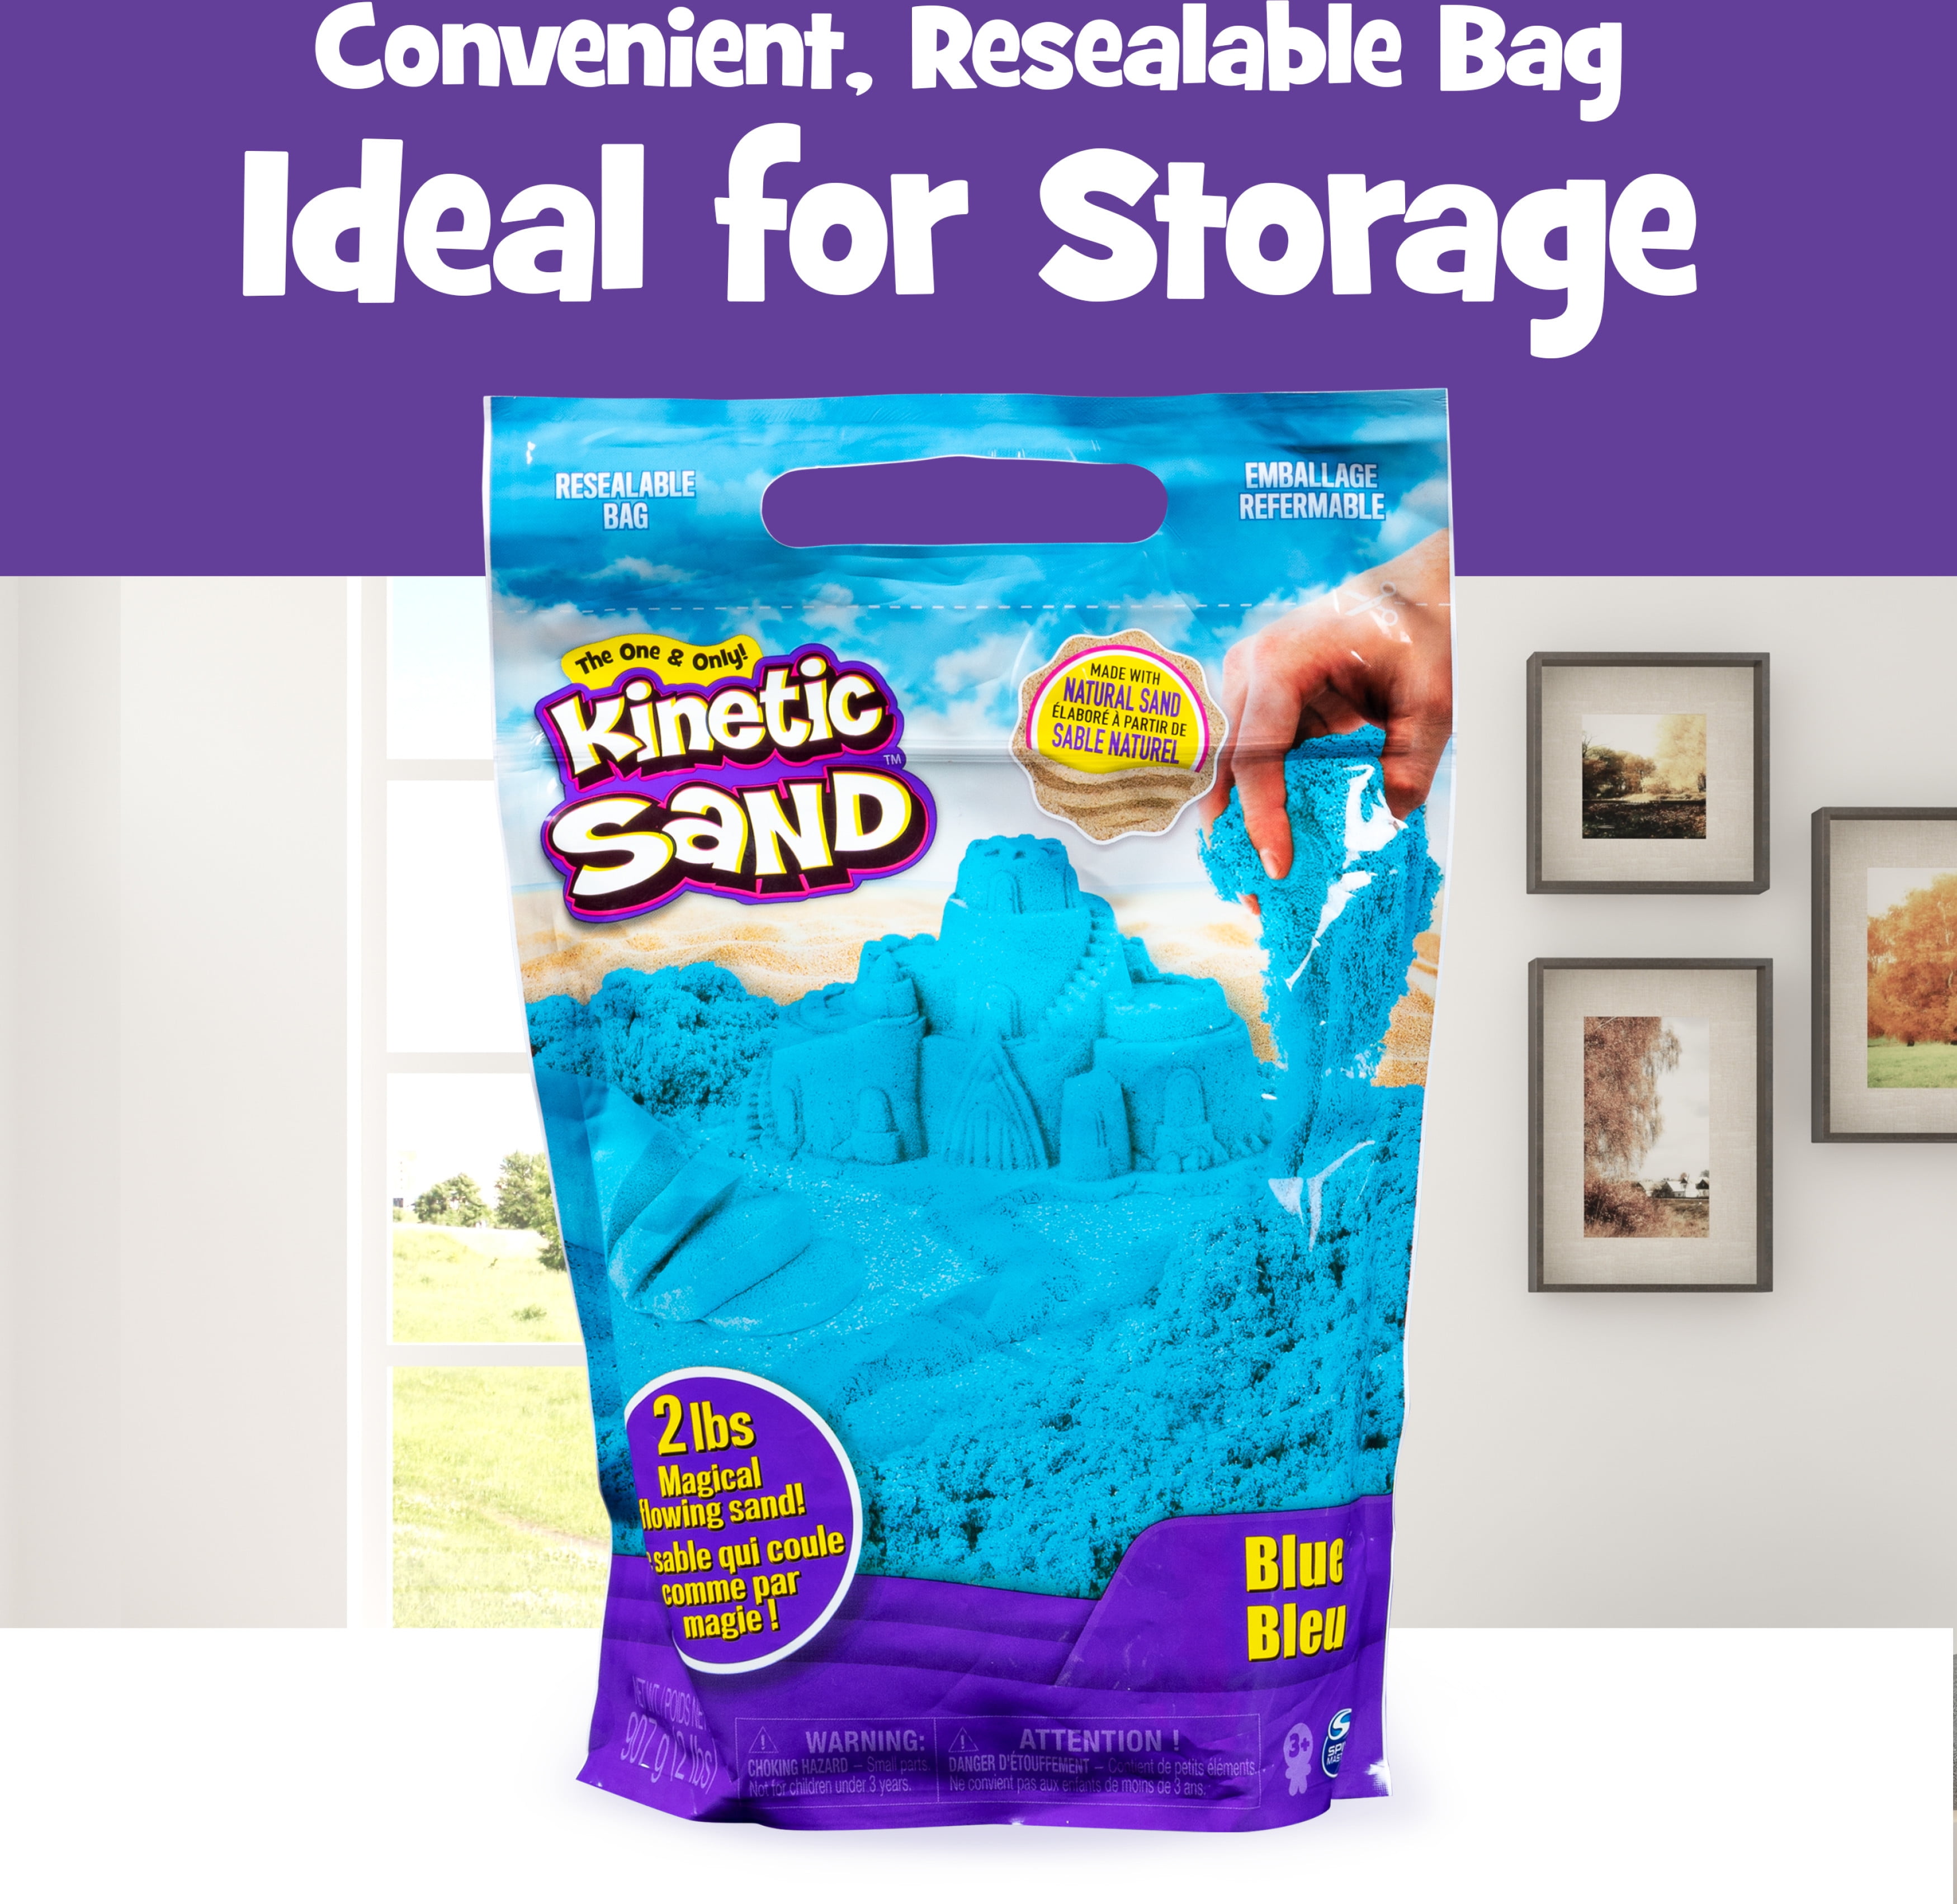 Moldable Indoor Play Sand in Resealable Bag CoolSand Aqua Blue 2 Pound Refill Pack 